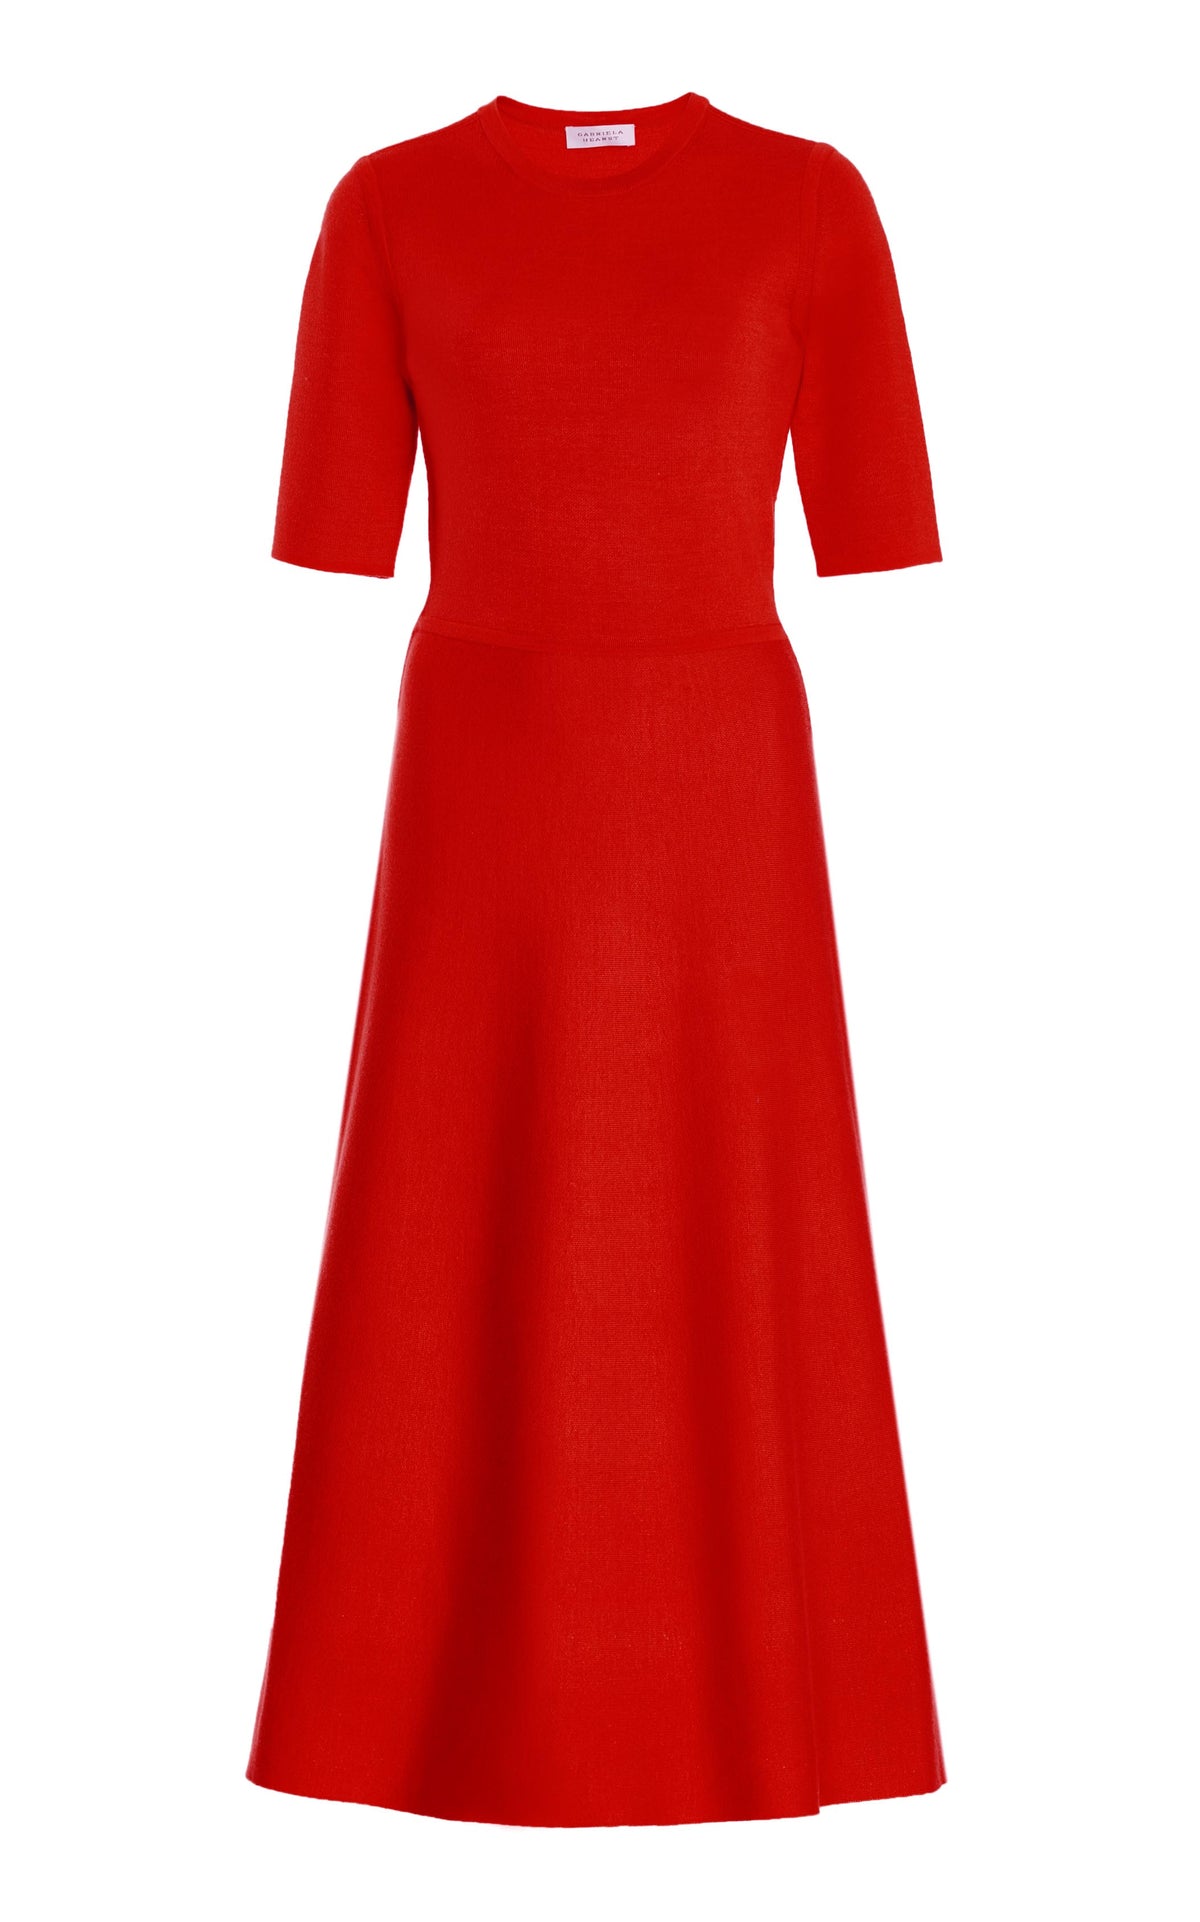 Buy VERO MODA Red Womens Round Neck Lace Sheath Dress | Shoppers Stop